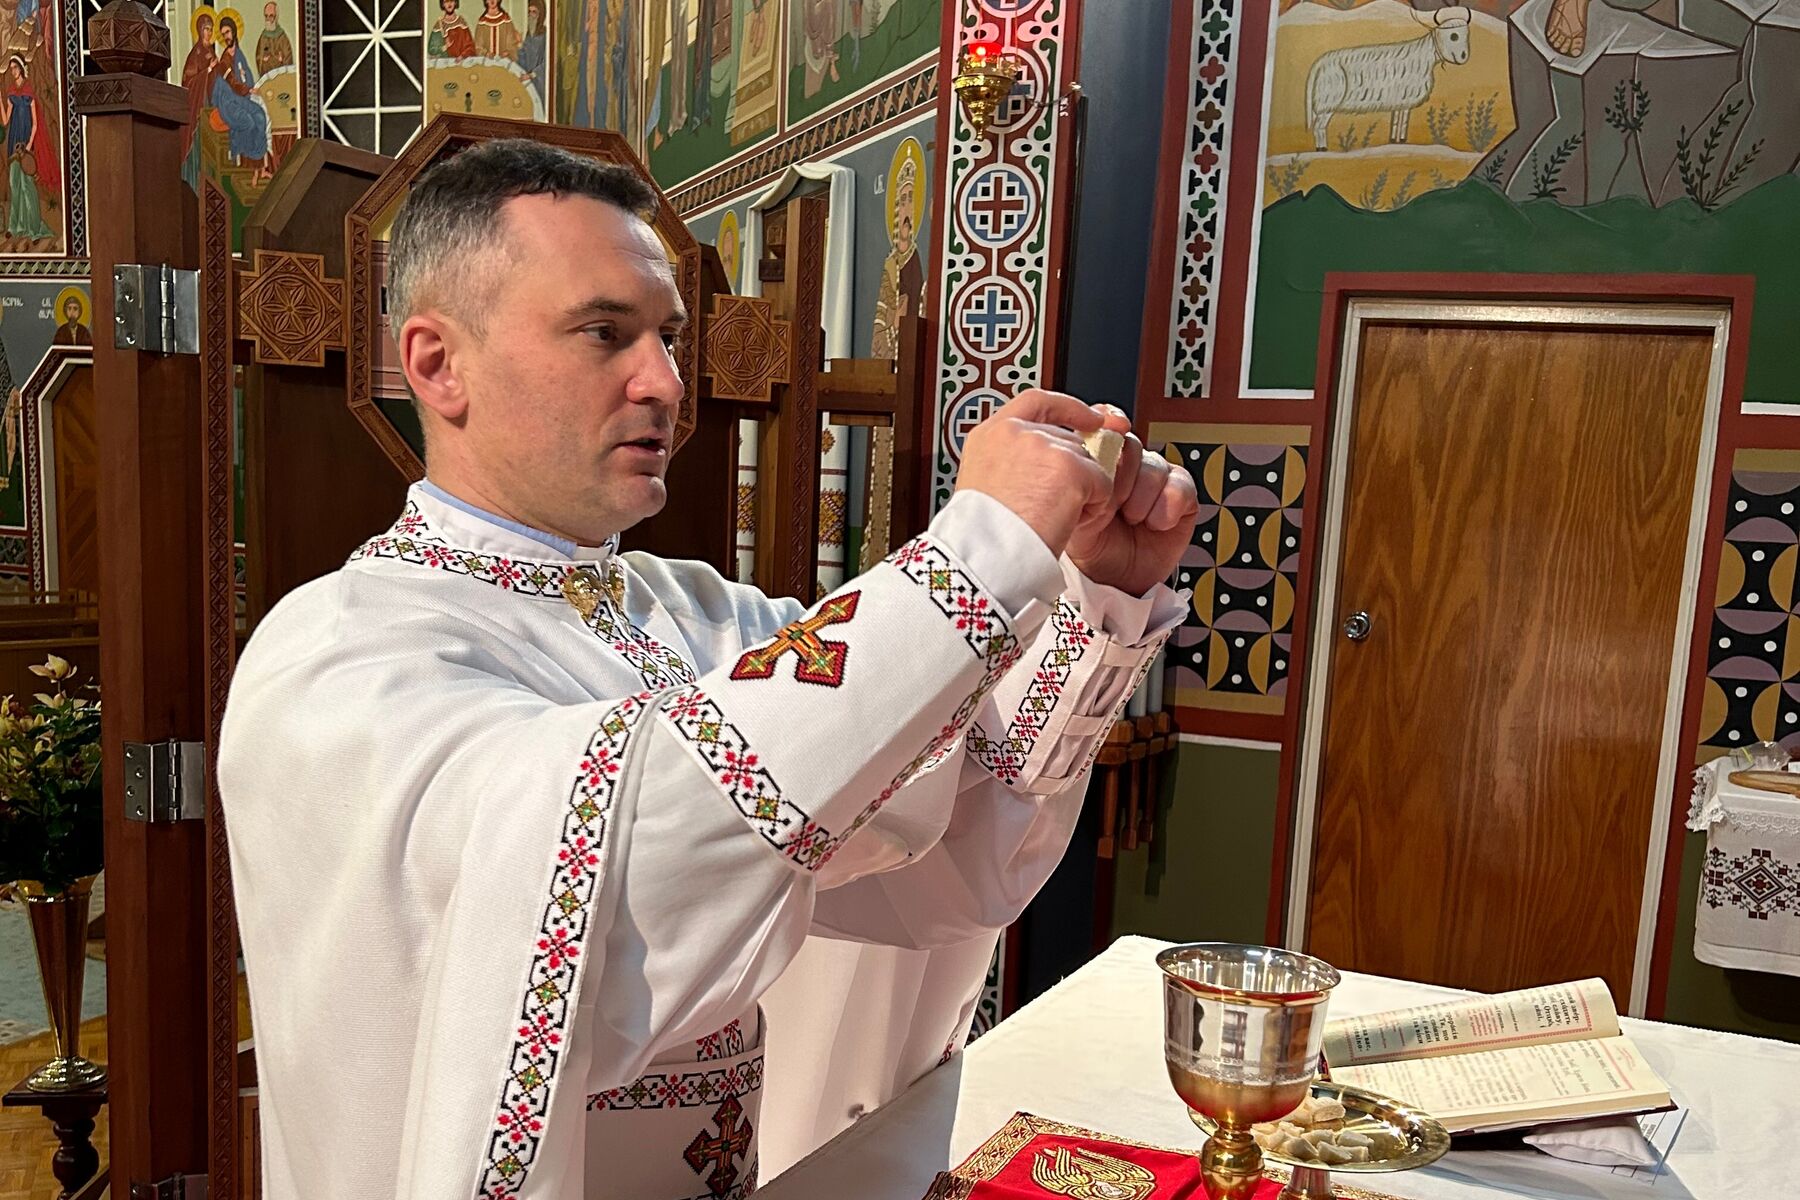 Homily by Fr. Yuriy Tychenok on the Eighth Sunday after Pentecost